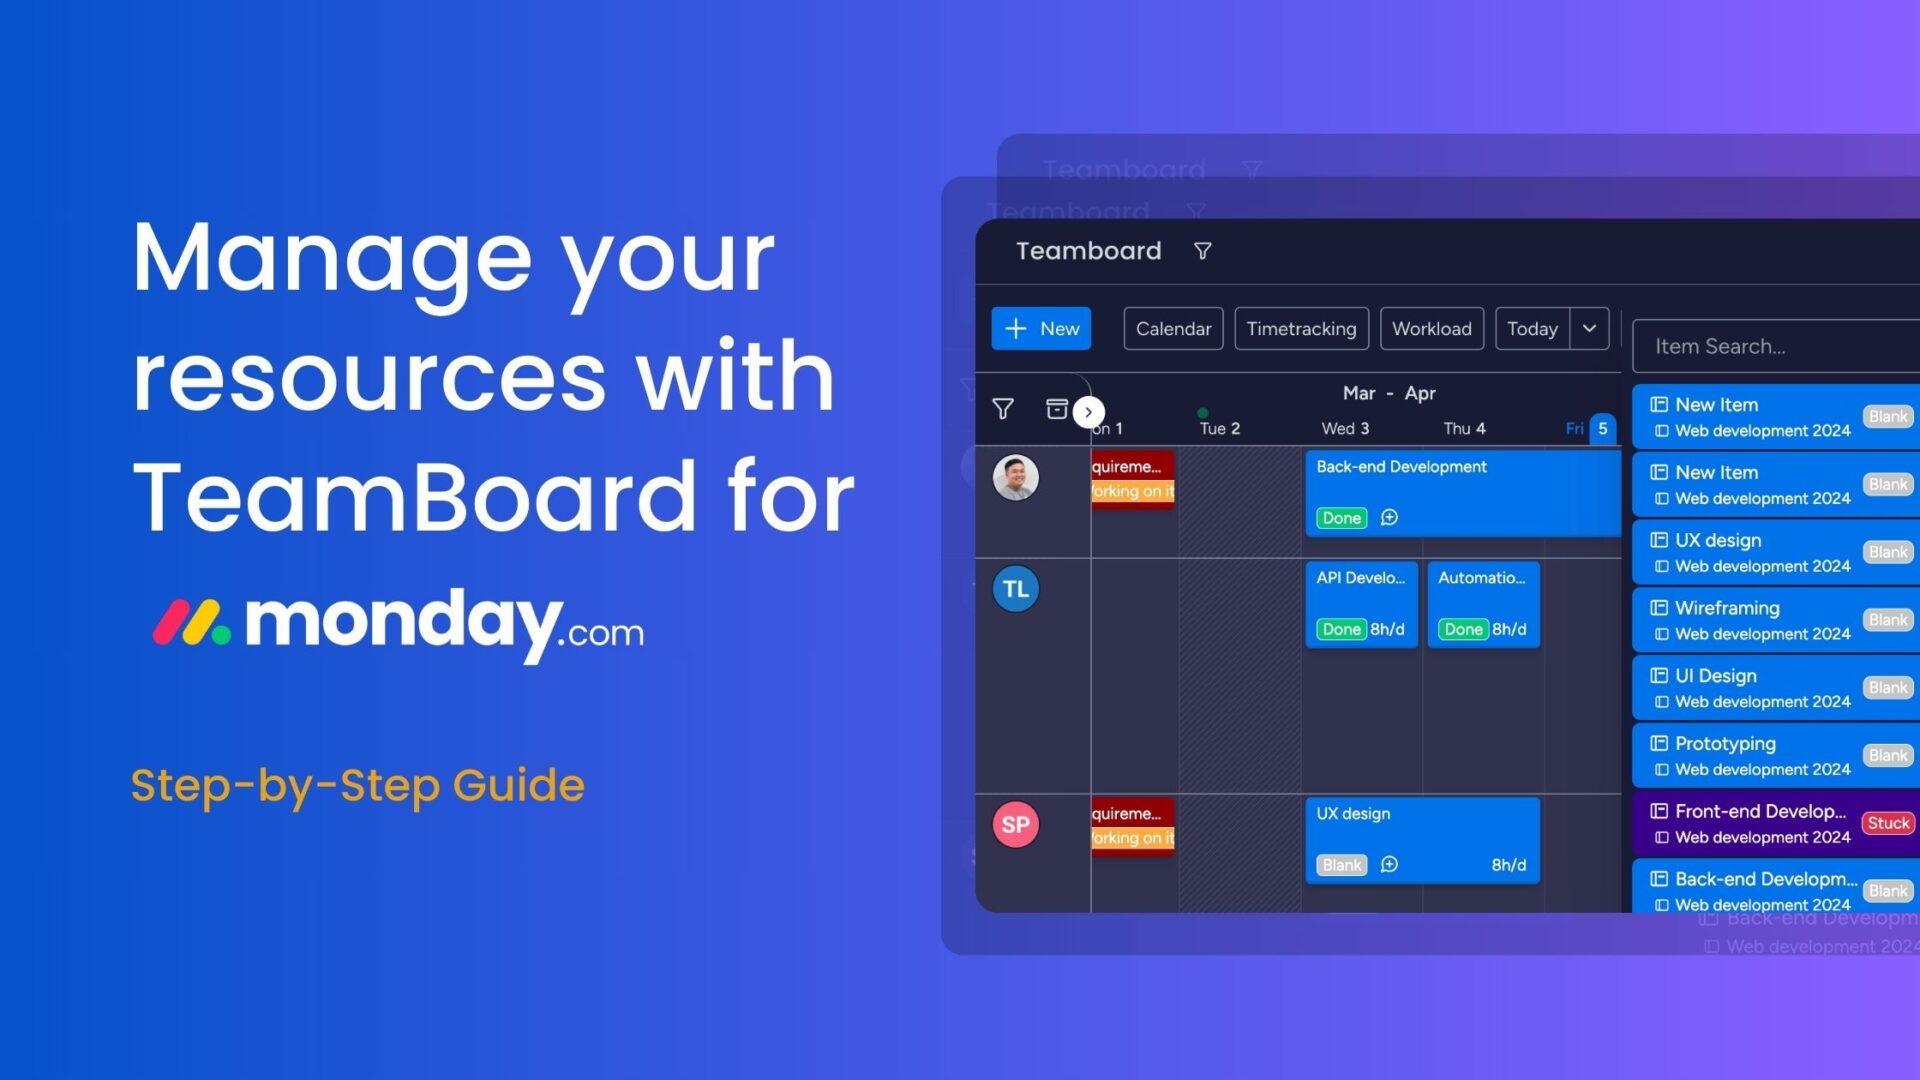 Manage your resources with TeamBoard for monday.com